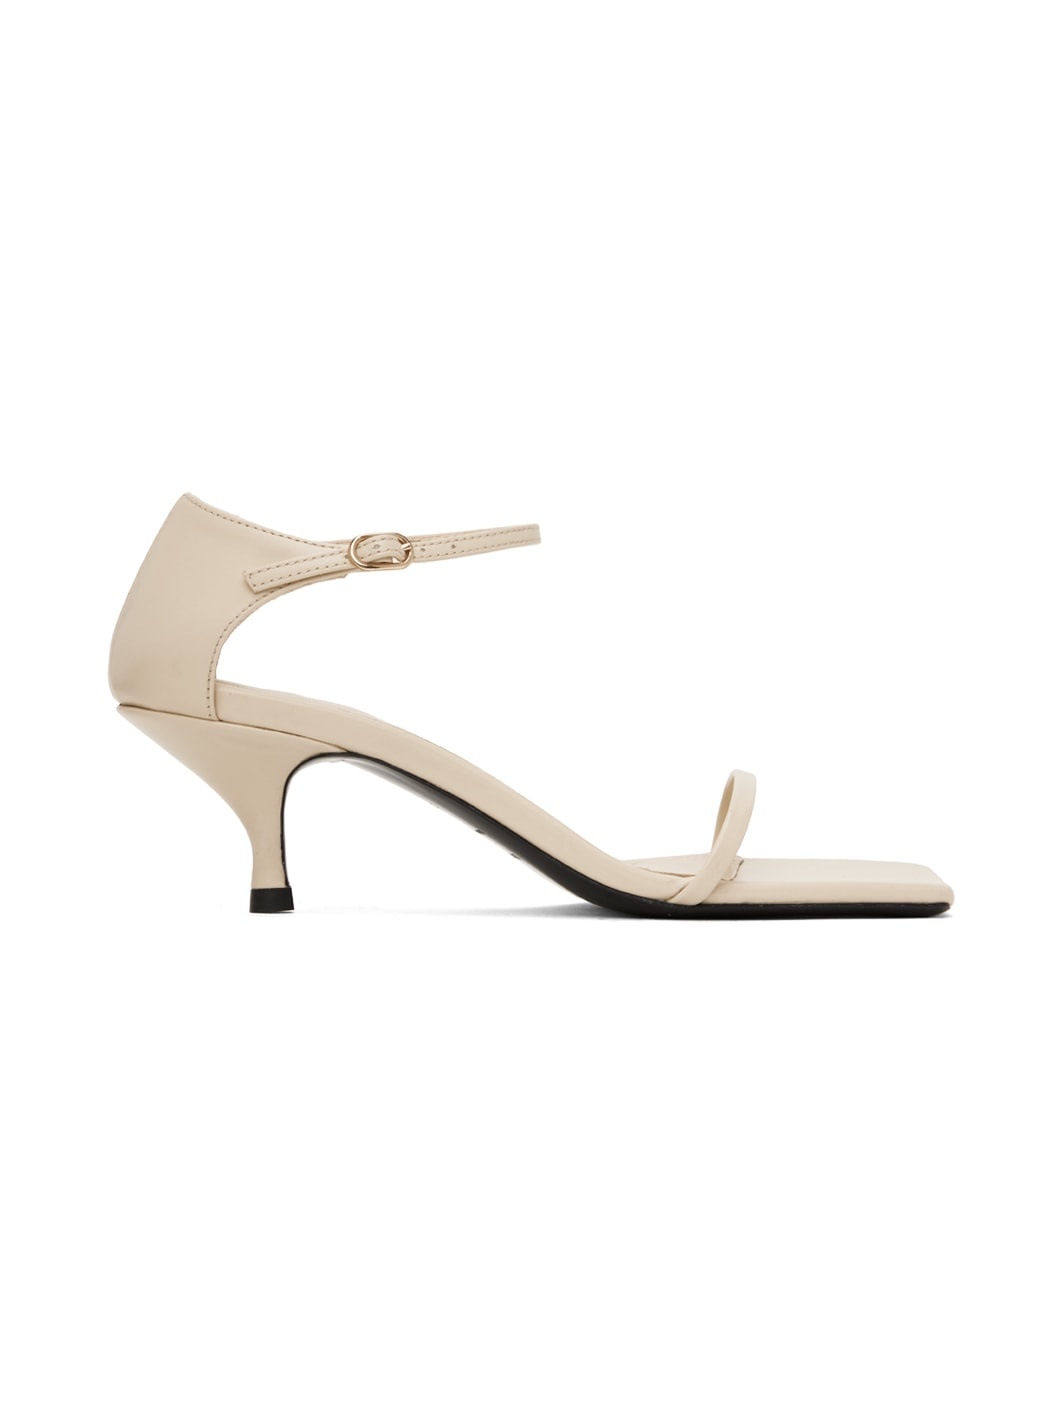 Off-White 'The Strappy' Heeled Sandals - 1